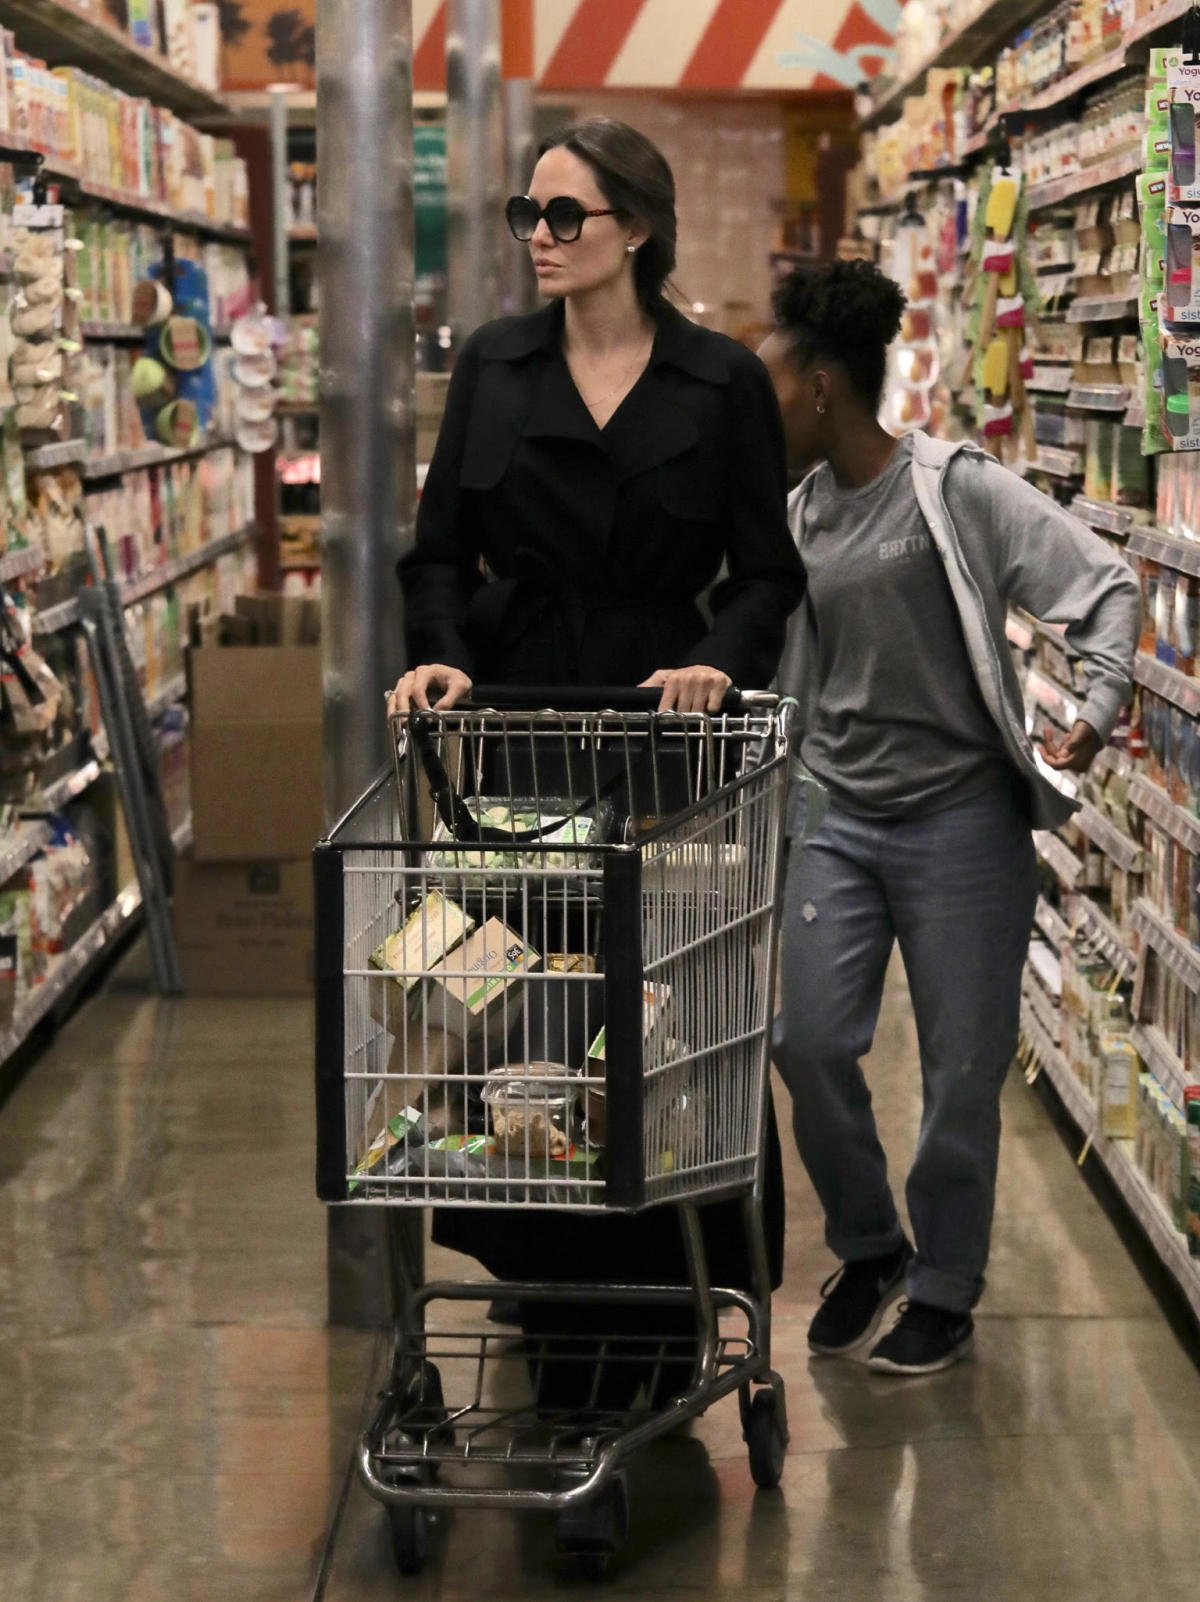 Angelina Jolie seen for first time in months as she goes shopping